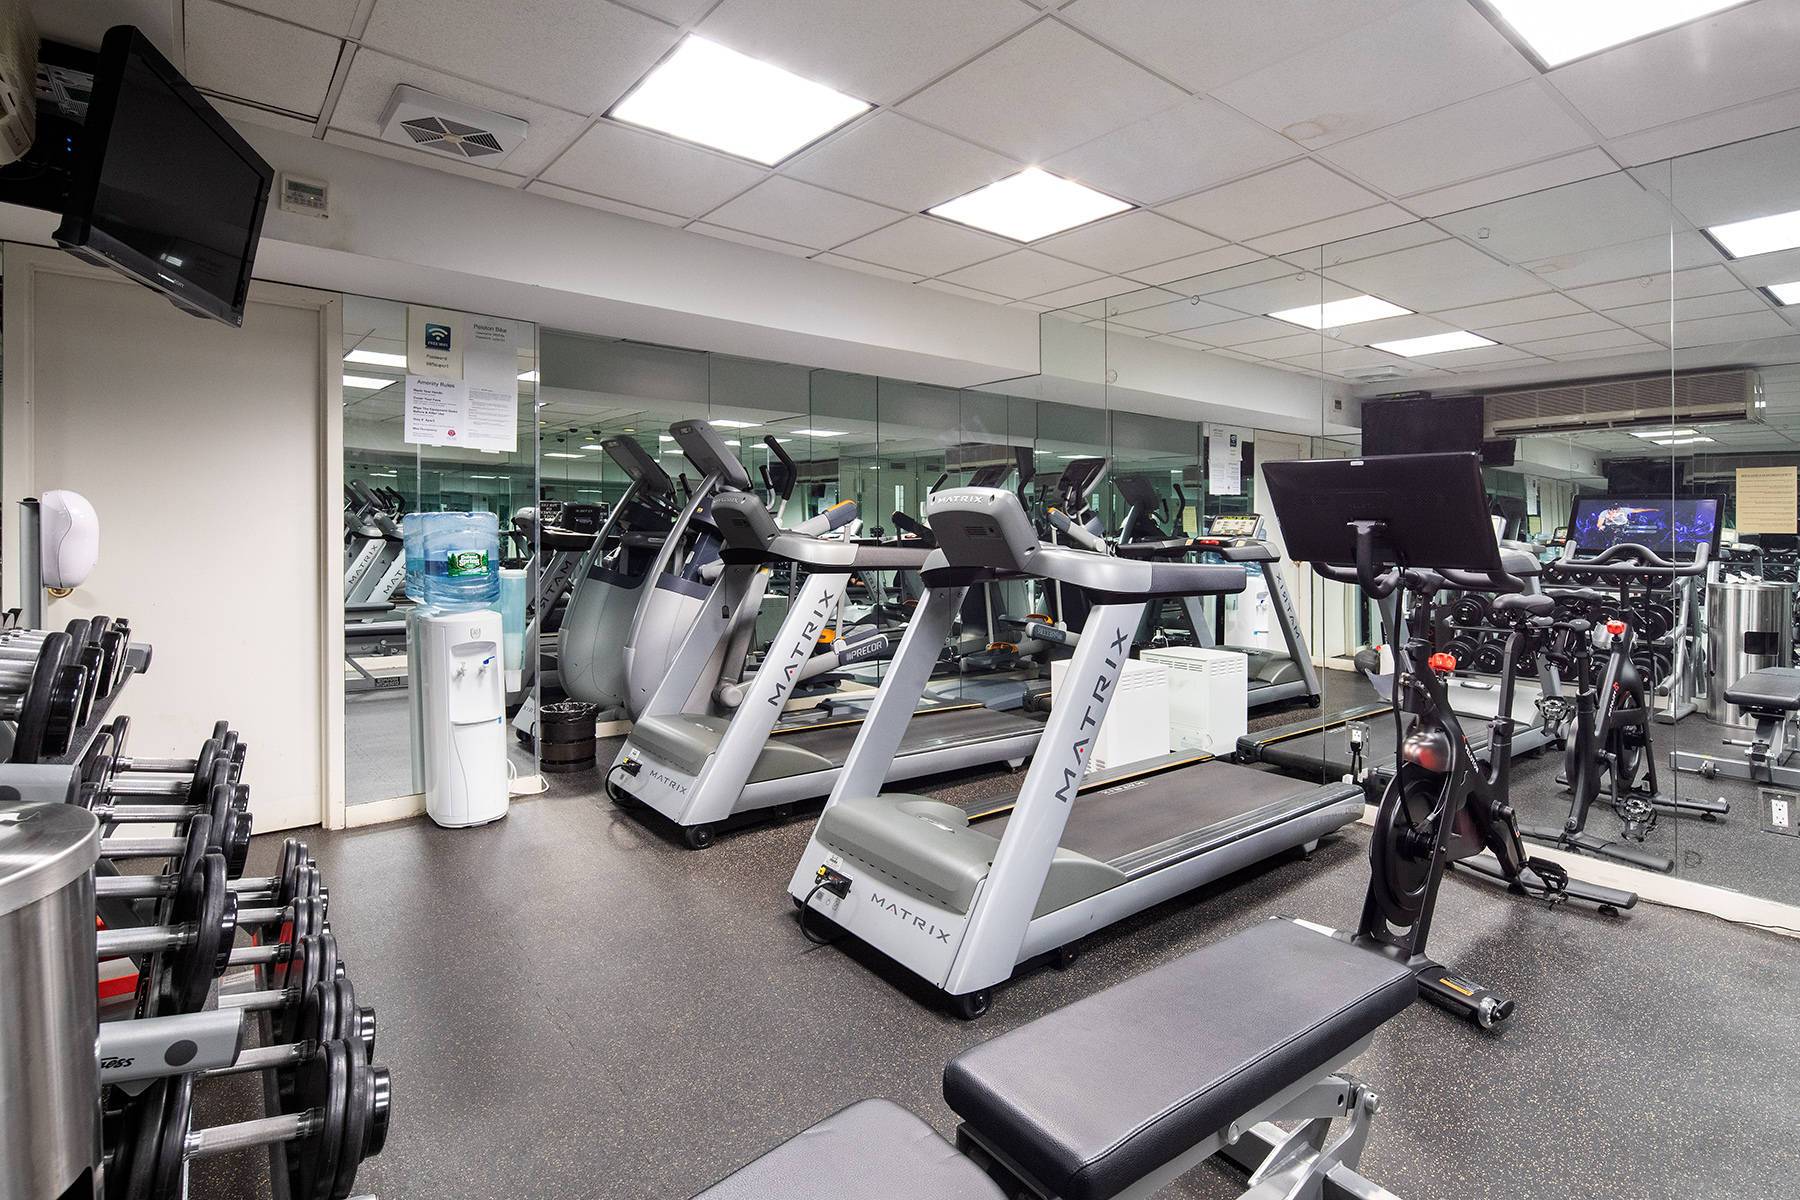 Fitness center with mirrored walls, television, treadmills, bench and bike